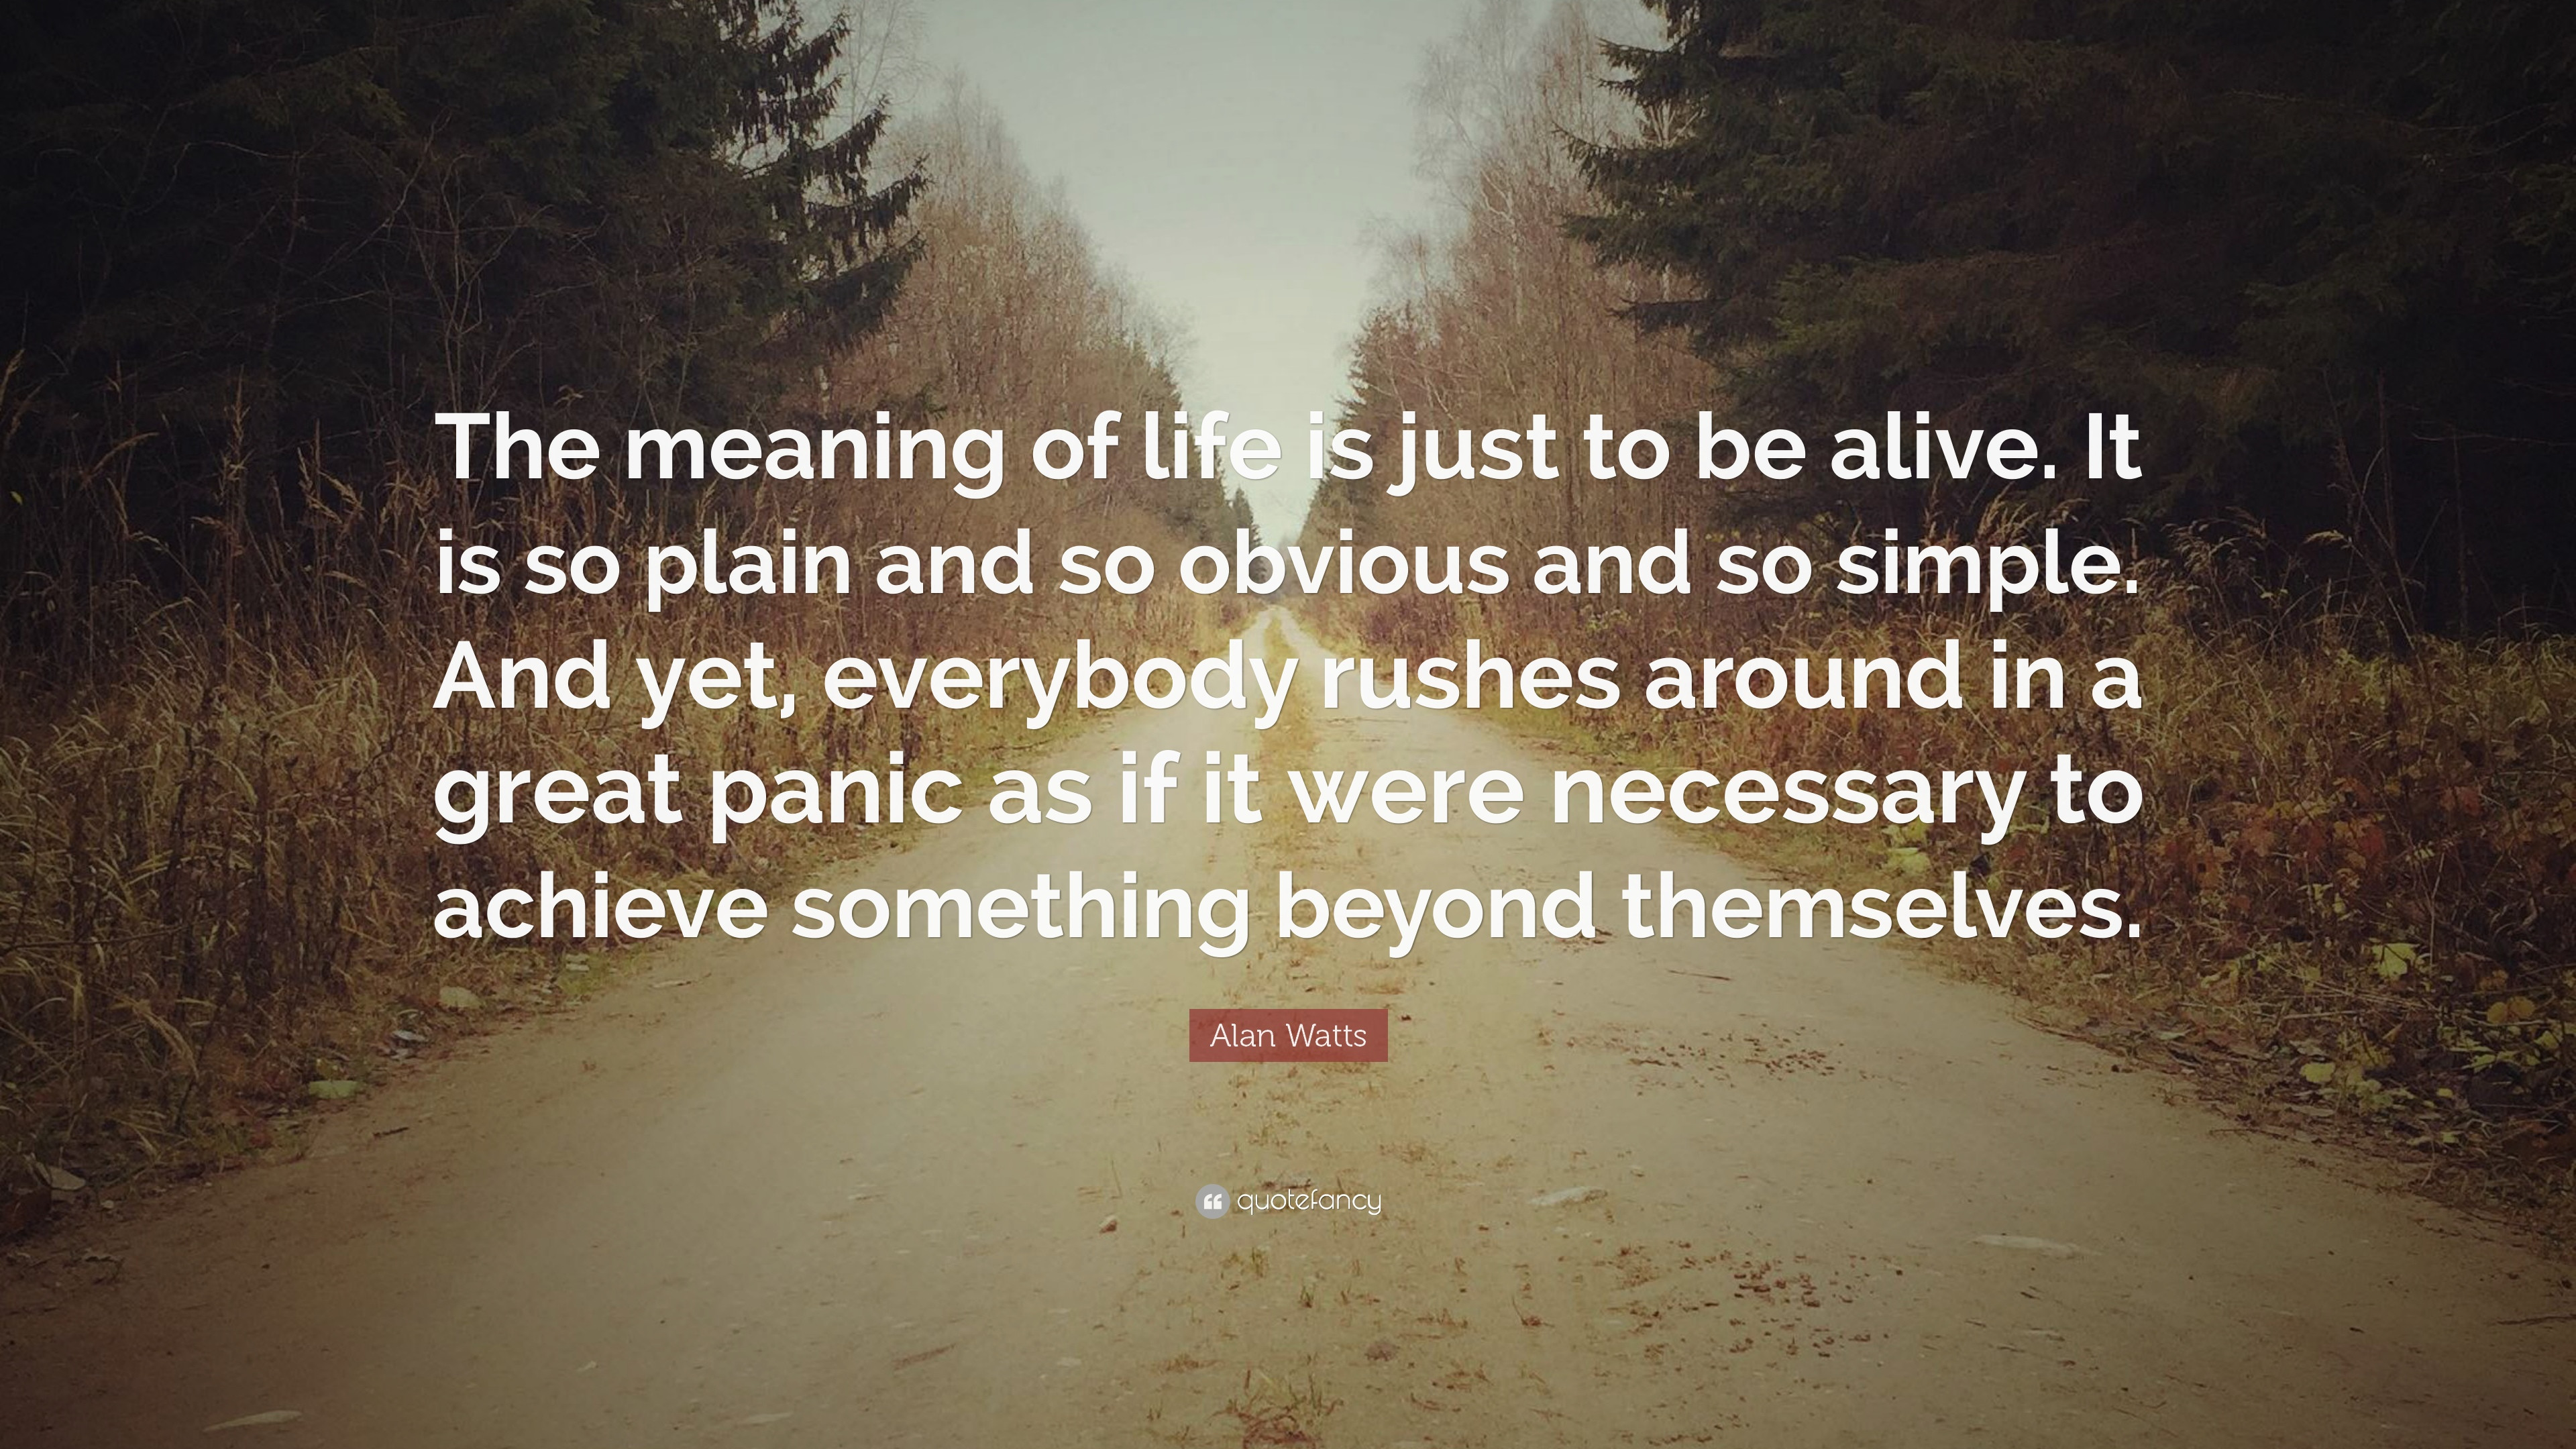 Alan Watts Quotes About Life
 Alan Watts Quote “The meaning of life is just to be alive